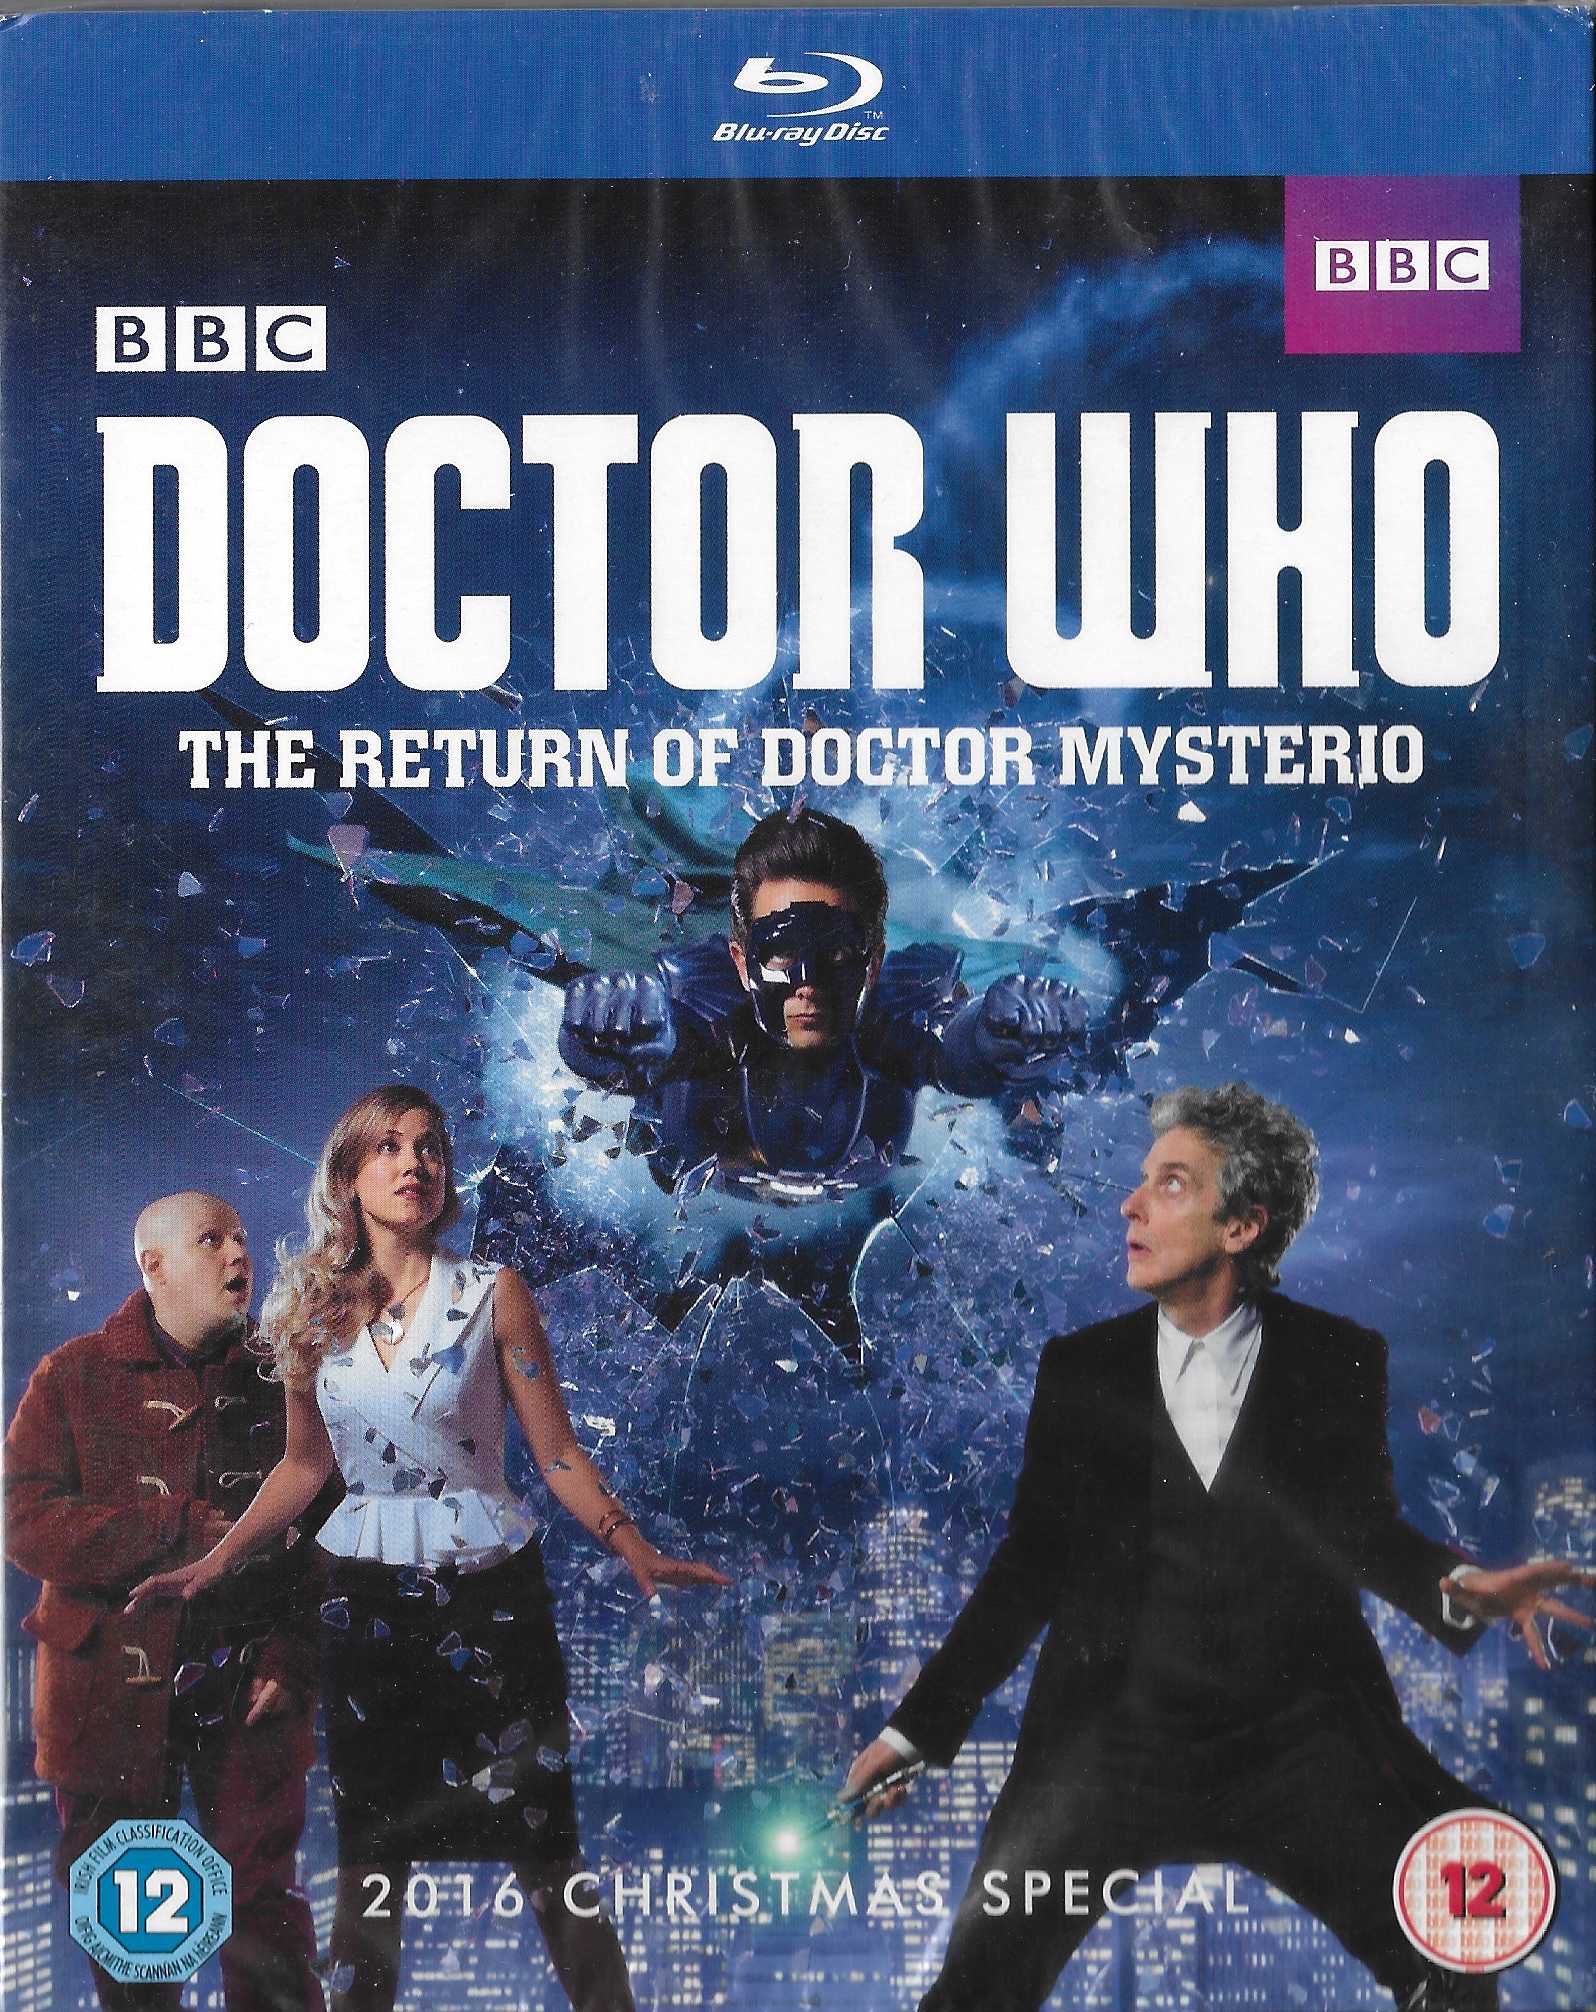 Picture of BBCBD 0391 Doctor Who - The return of Doctor Mysterio by artist Steven Moffat from the BBC records and Tapes library